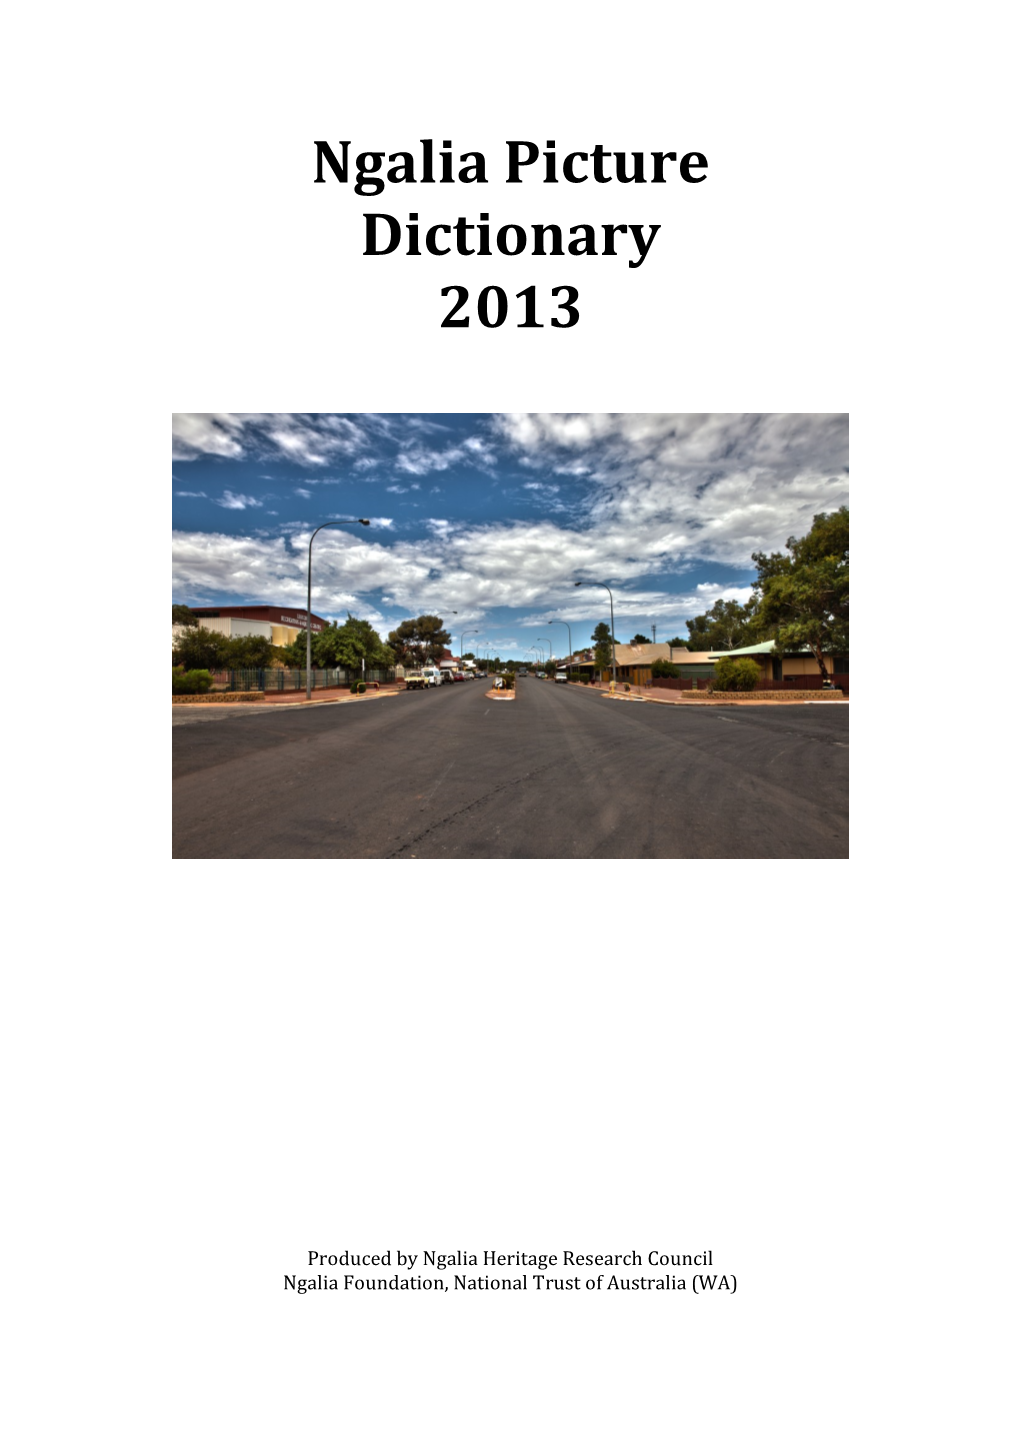 Ngalia Picture Dictionary 2013